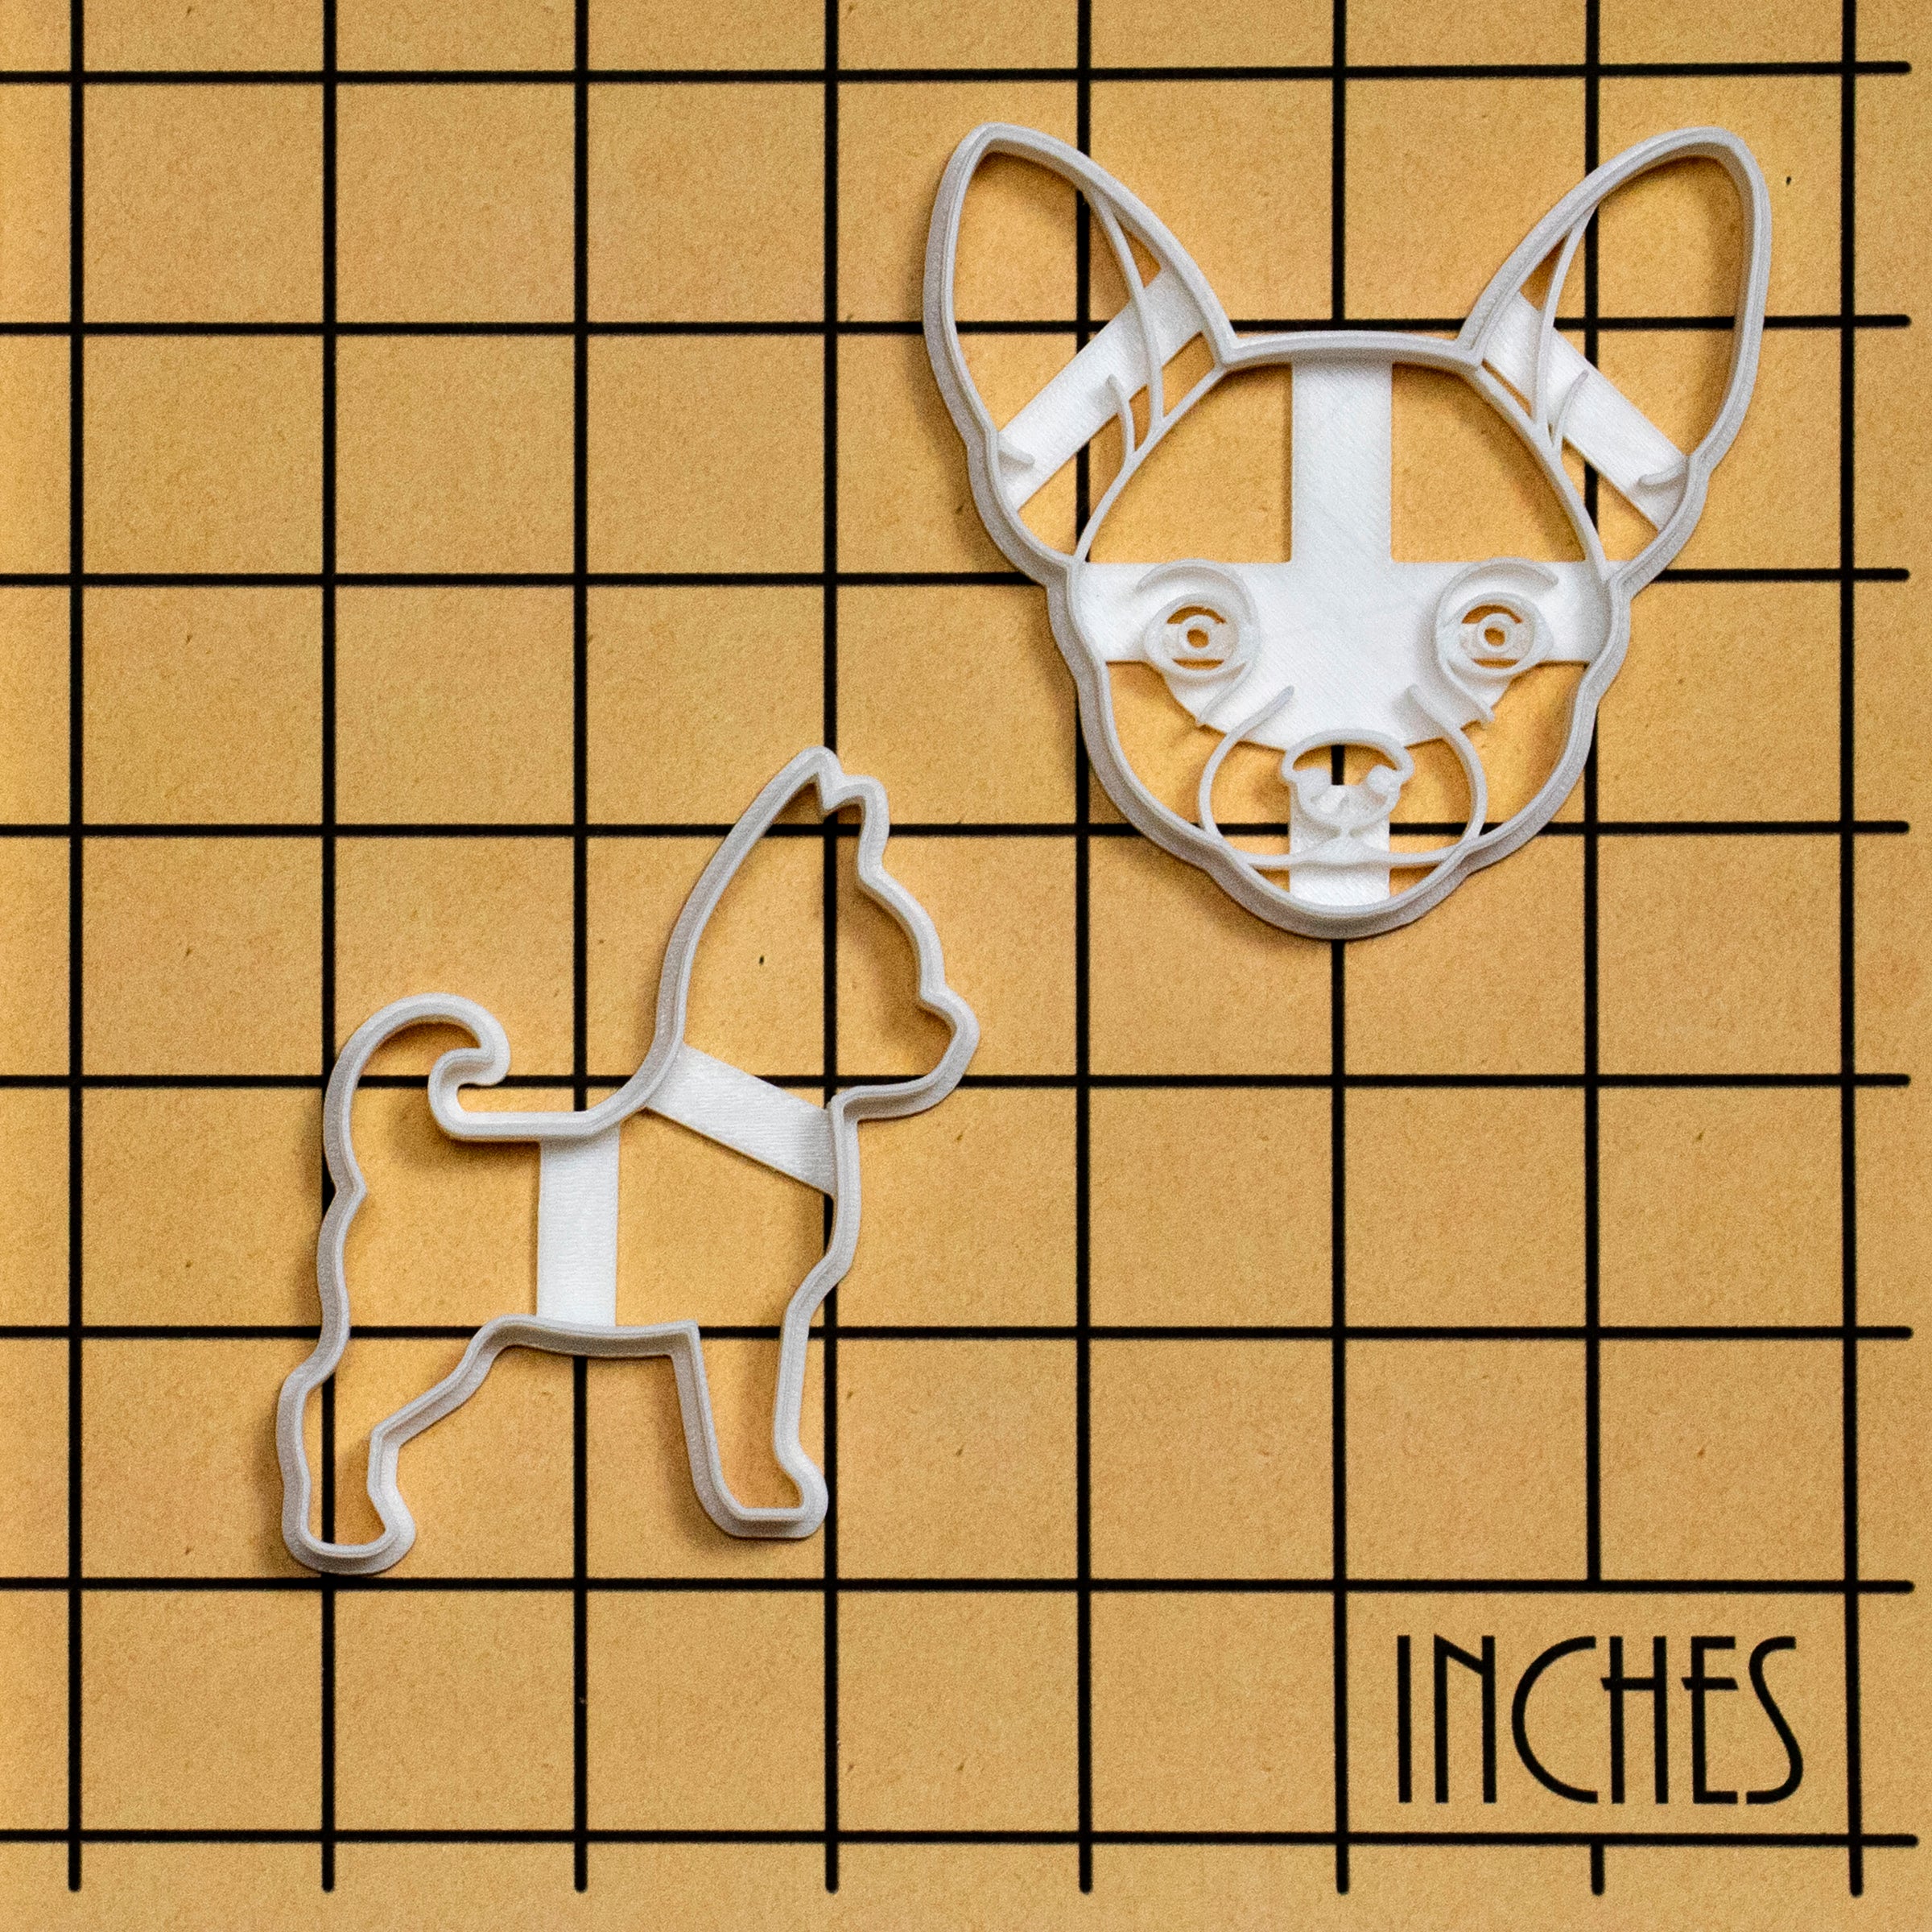 Set of 2 Chihuahua Cookie Cutters